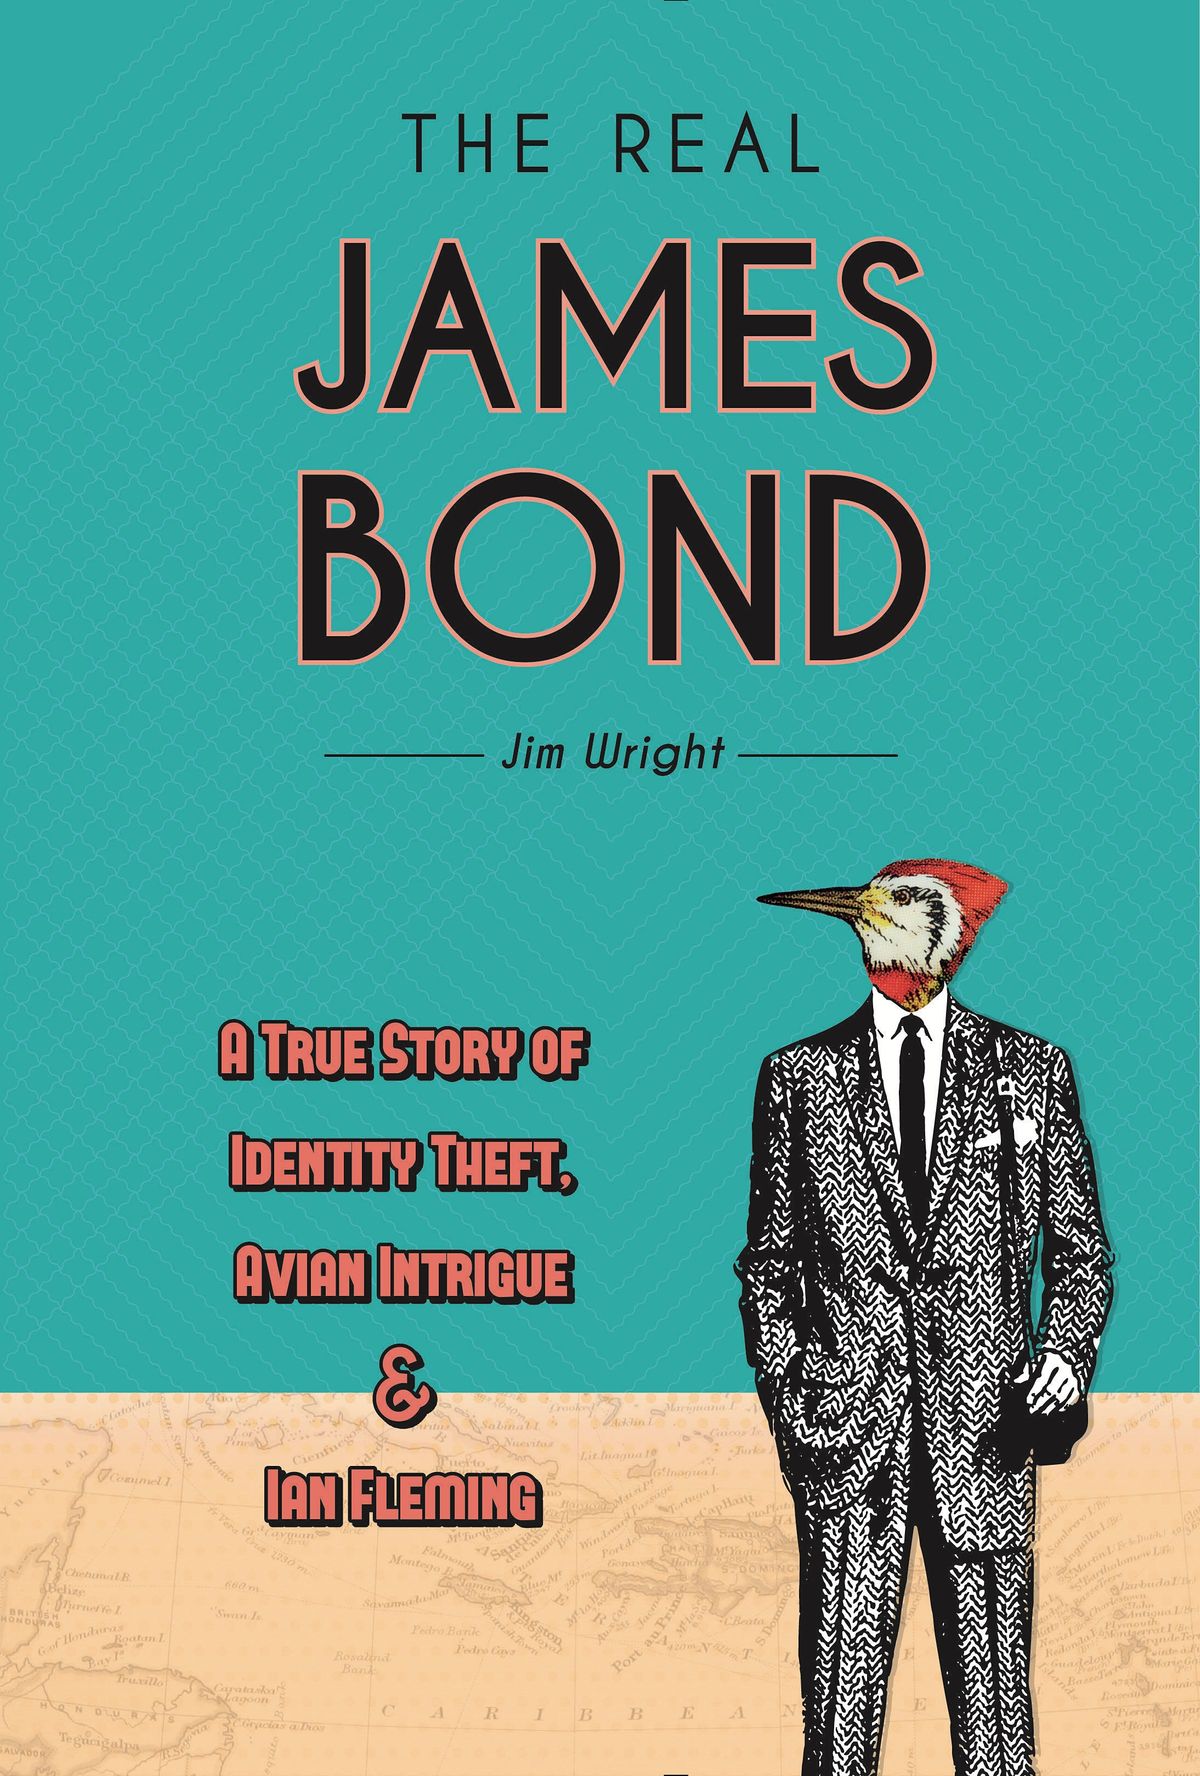 Hands-on History Presents: Uncovering the Real James Bond